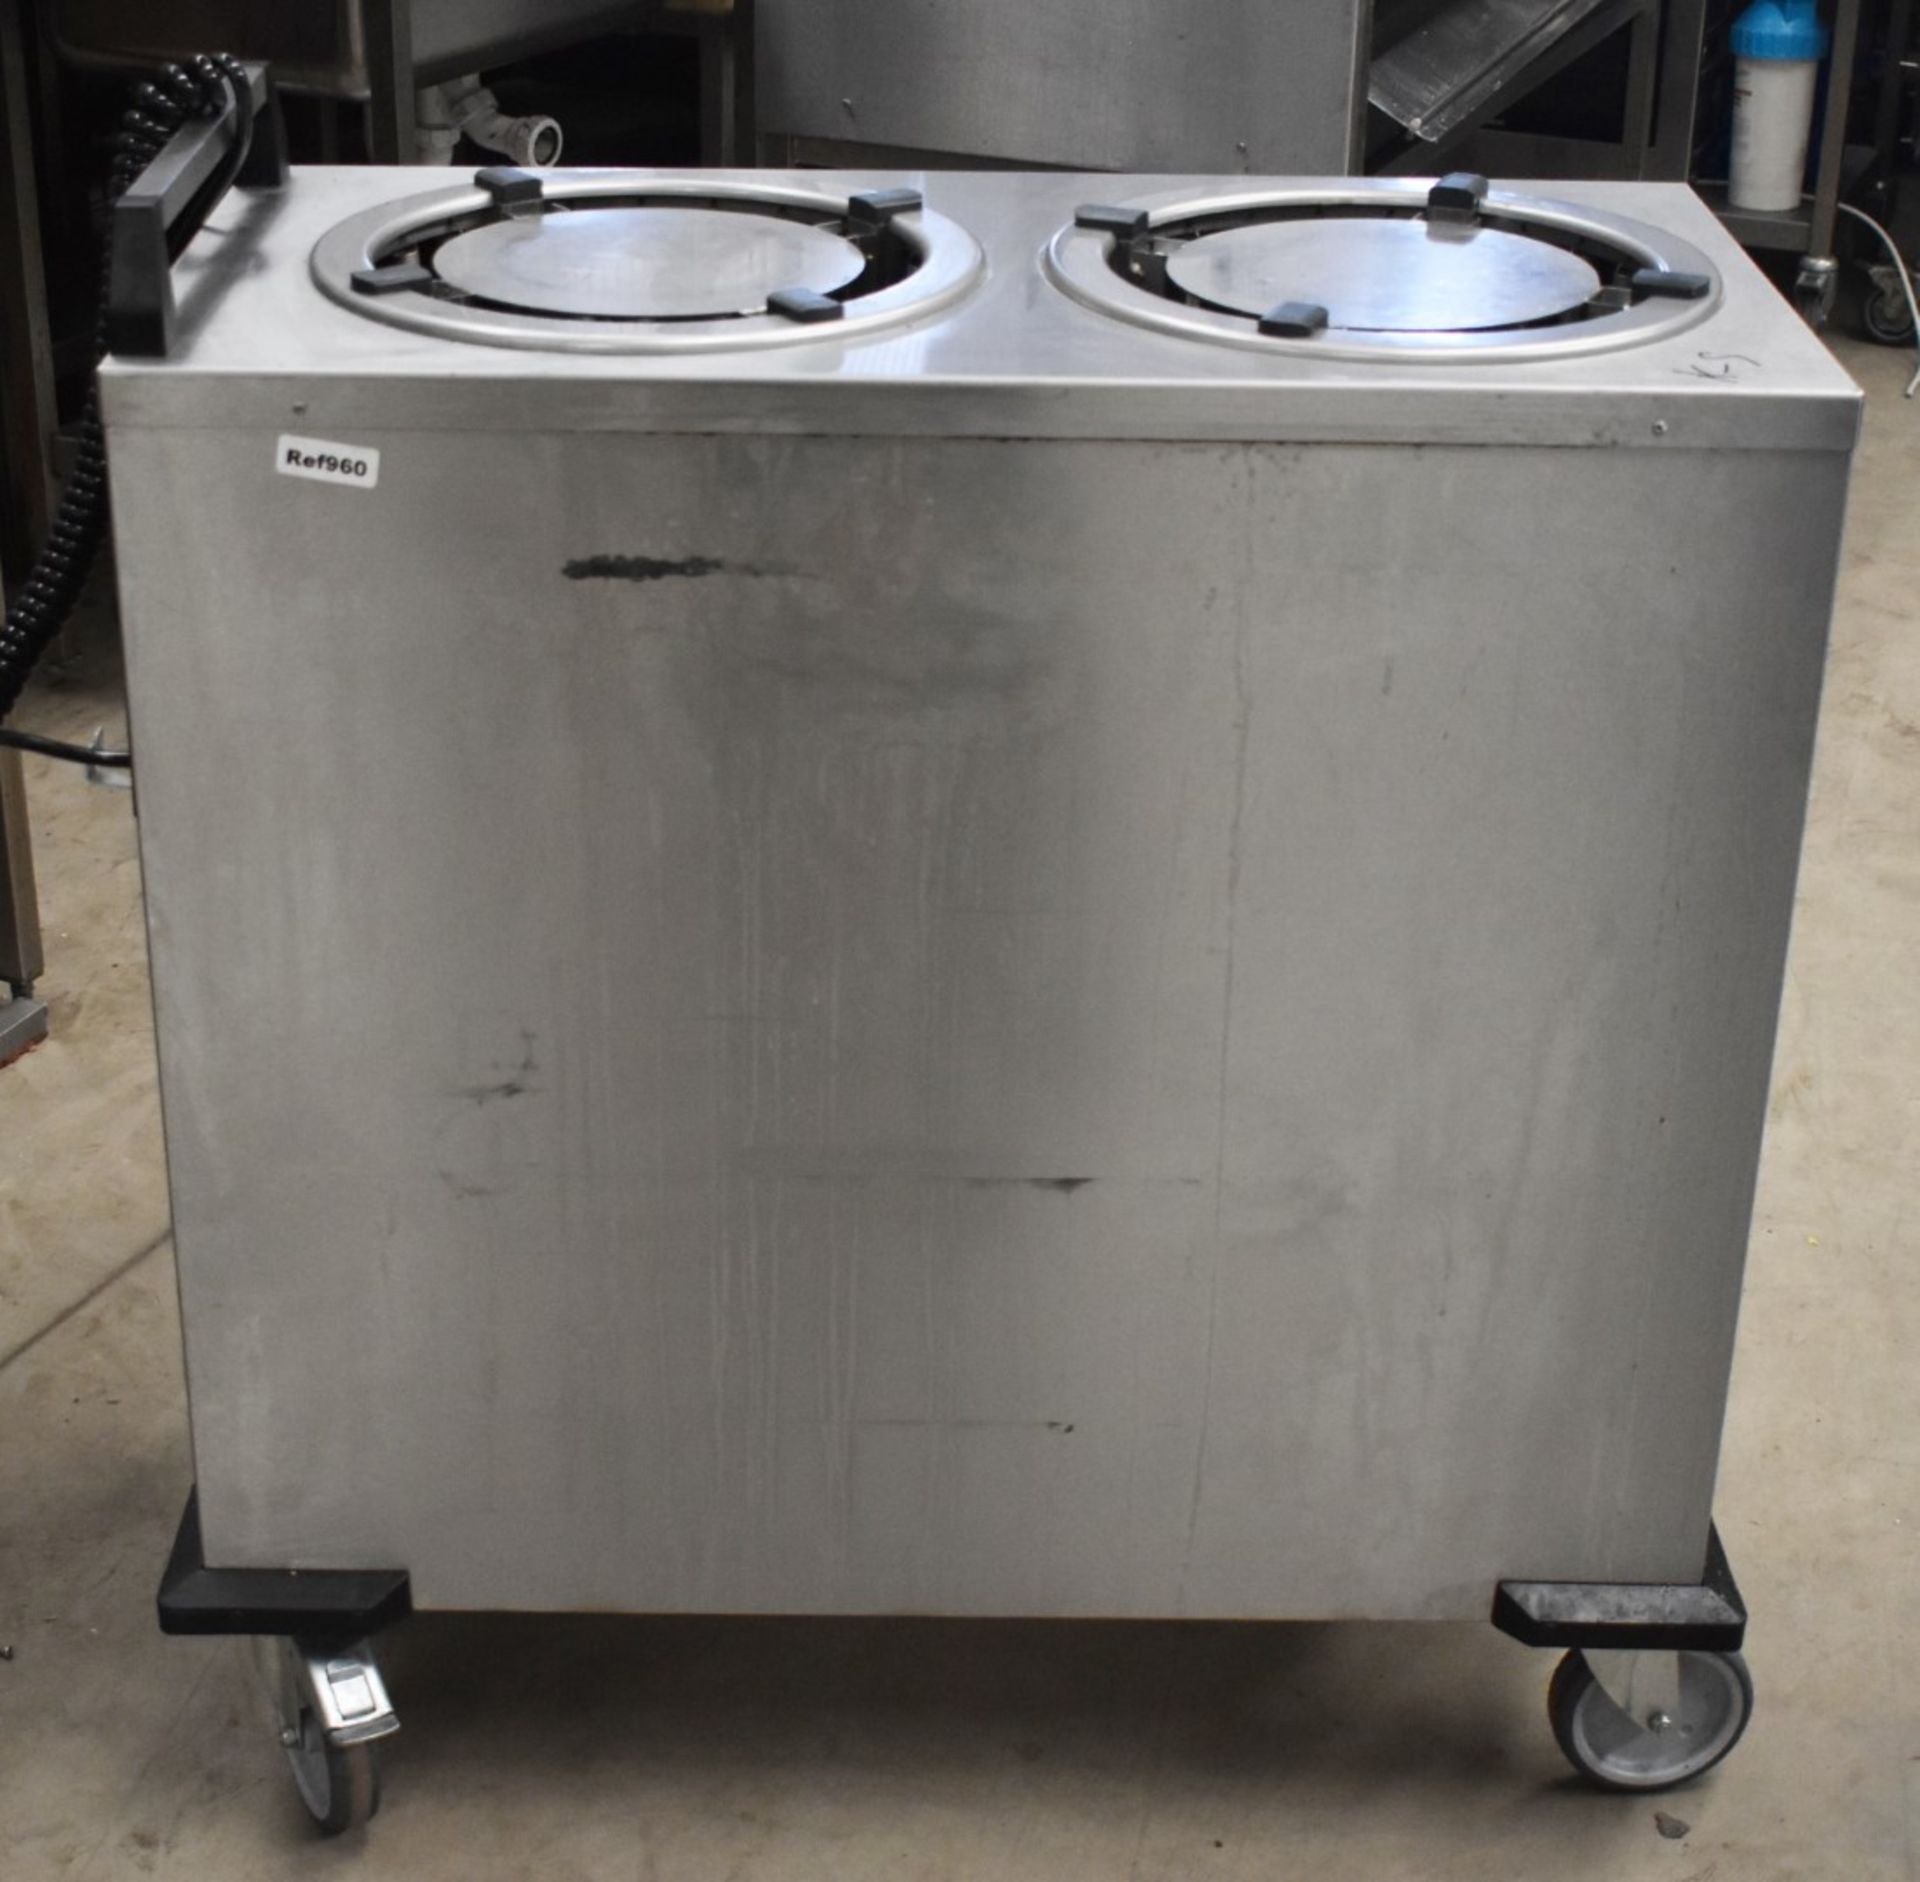 1 x Stainless Steel Twin Chamber Mobile Plate Warmer With Push Bar - Model THN-MS 280 - 280 Plate - Image 2 of 7